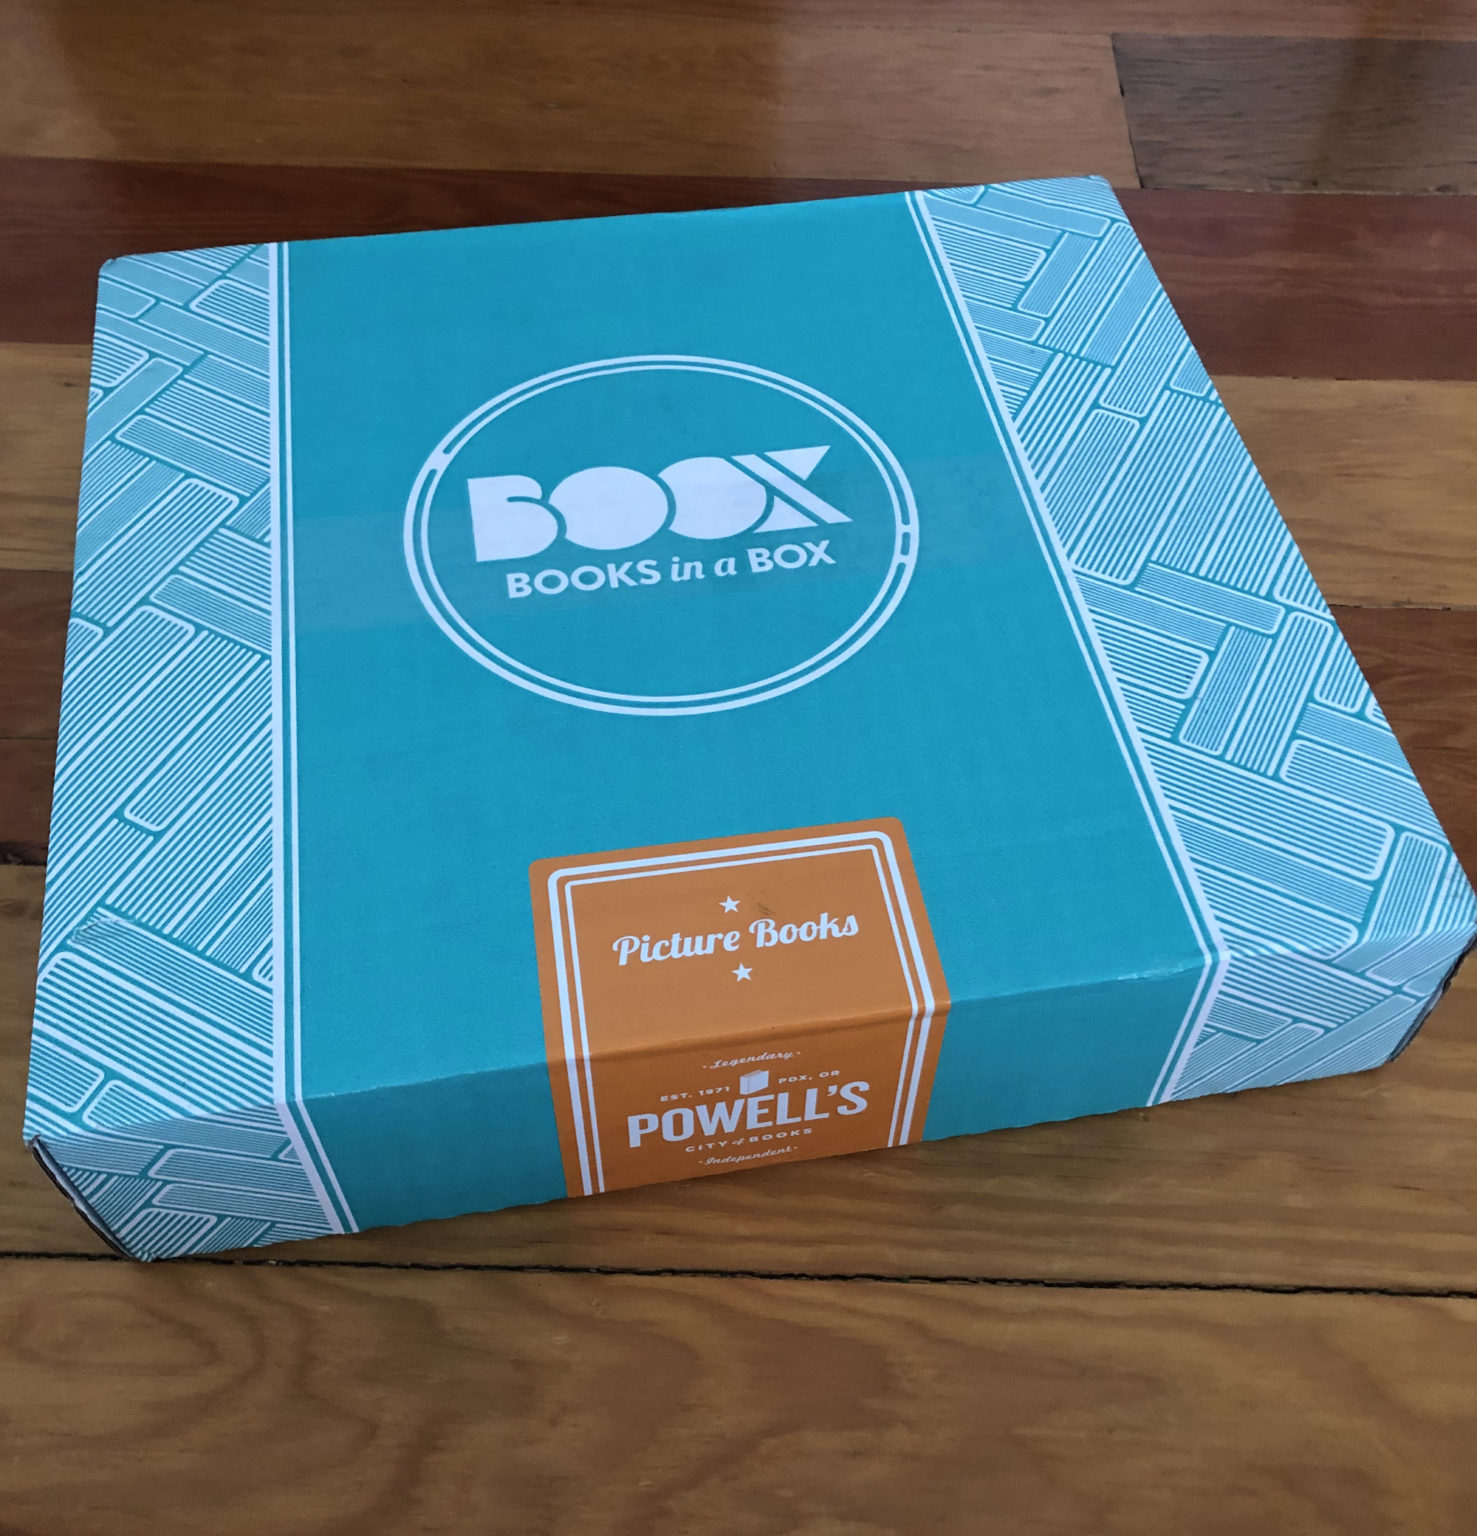 Powell's BOOX Box Review: Subscription Book Box for Kids